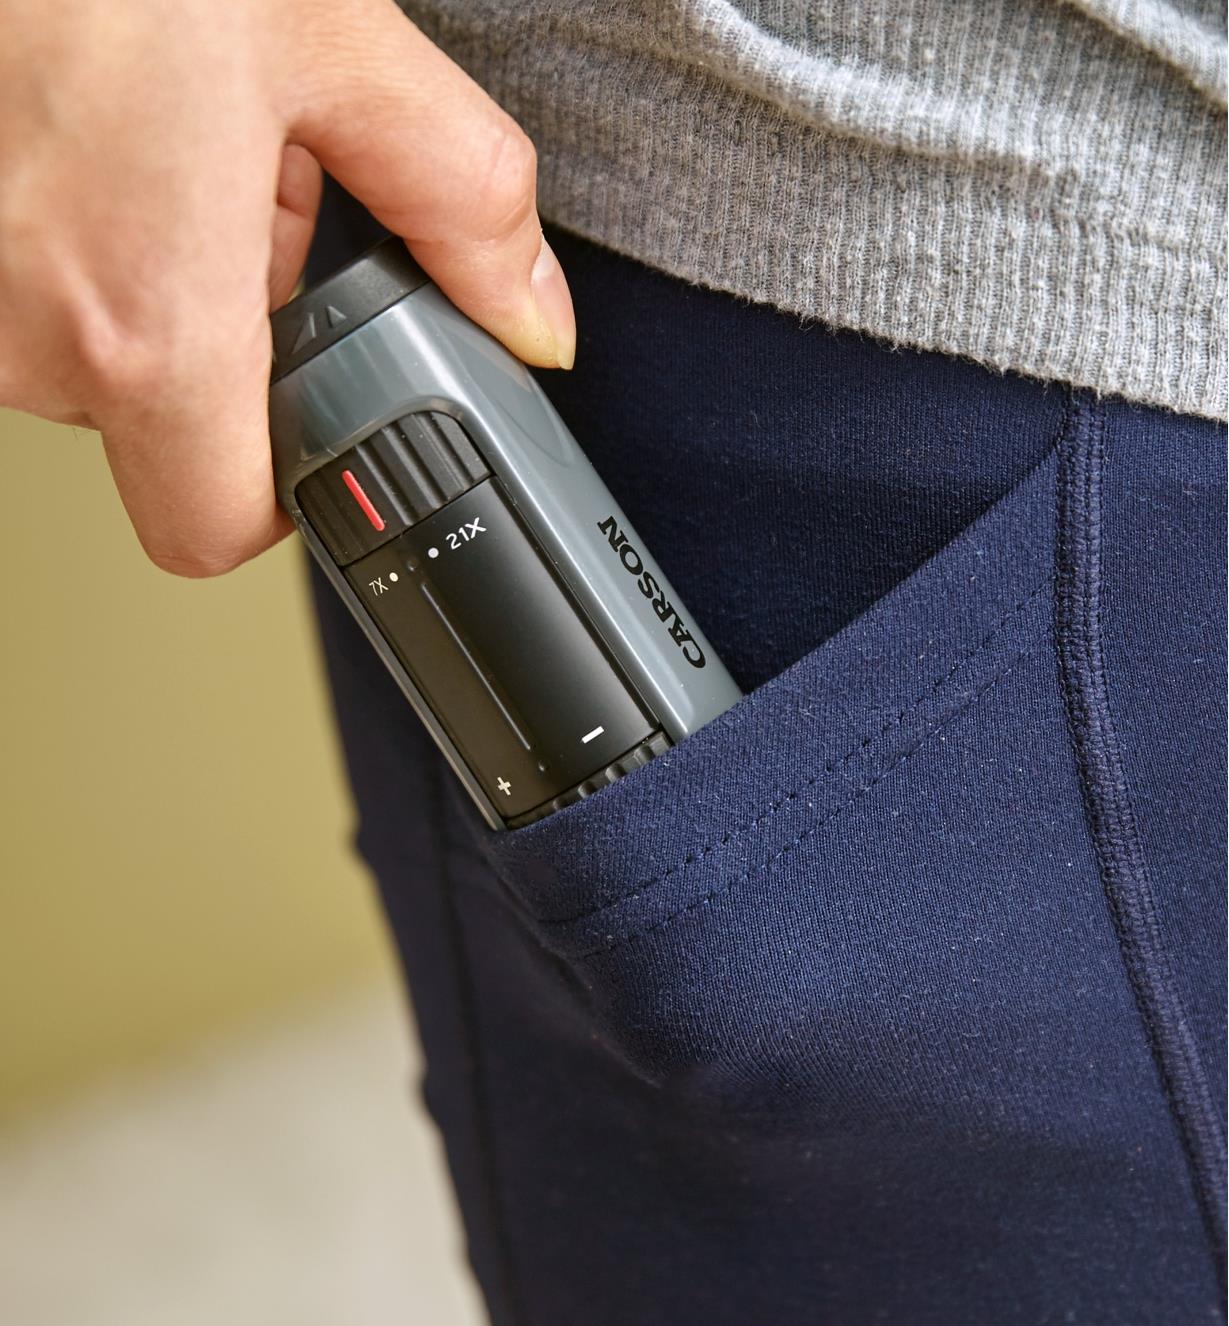 Slipping the zoom monocular into a pants pocket